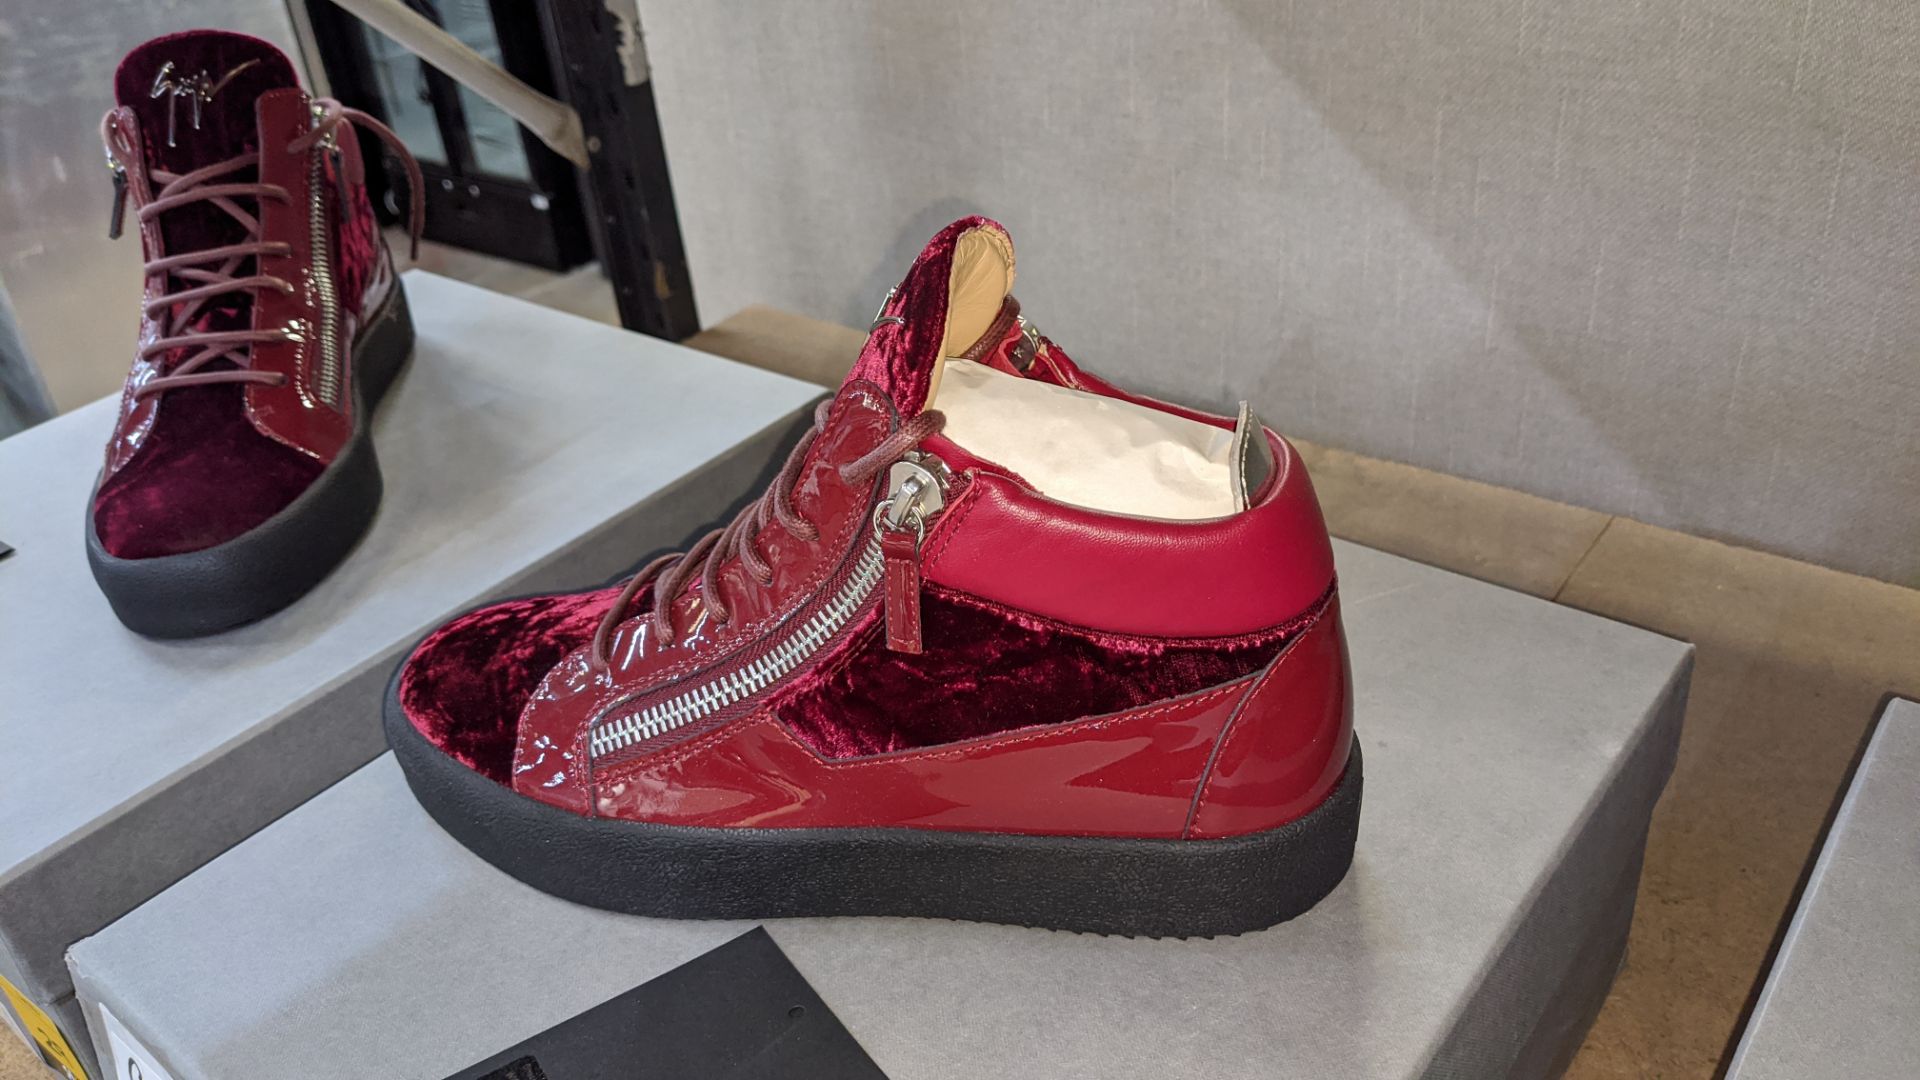 Pair of Giuseppe Zanotti High Top trainers, product code RU70010 colour Bordeaux (red) size EU41/ - Image 6 of 6